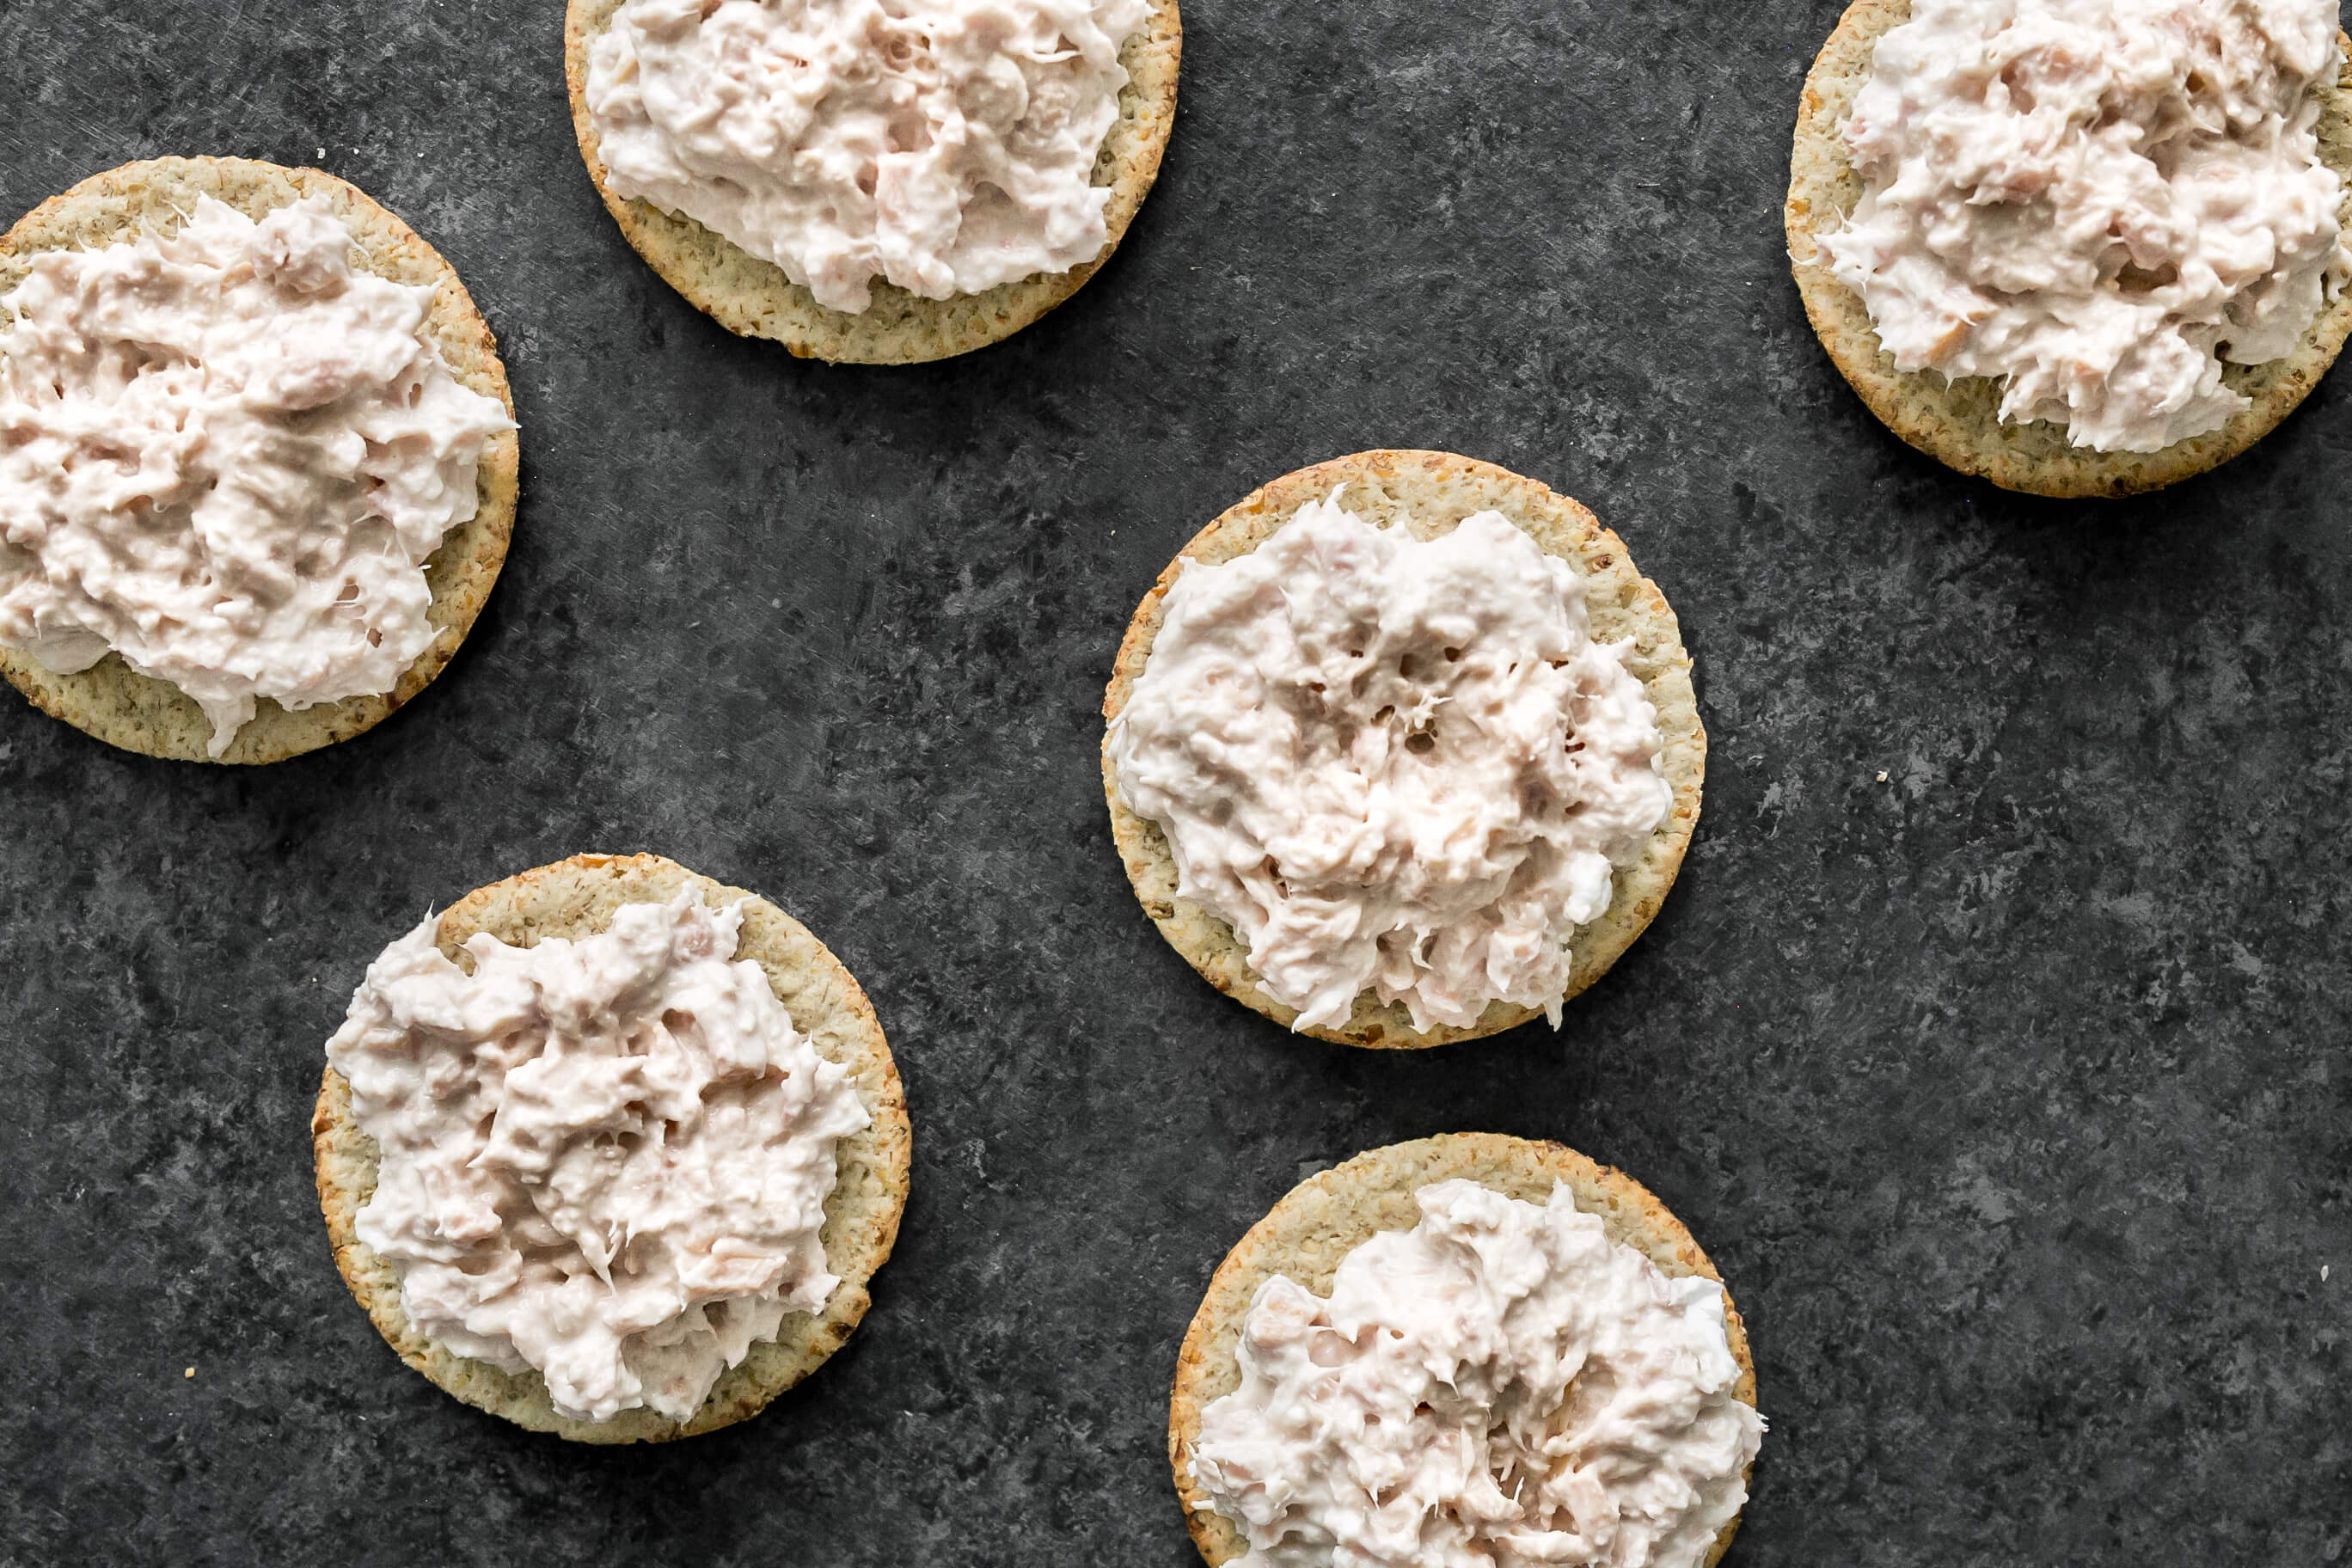 20 Meal Ideas to Support Student-Athletes: Creamy Tuna on Oat Crackers